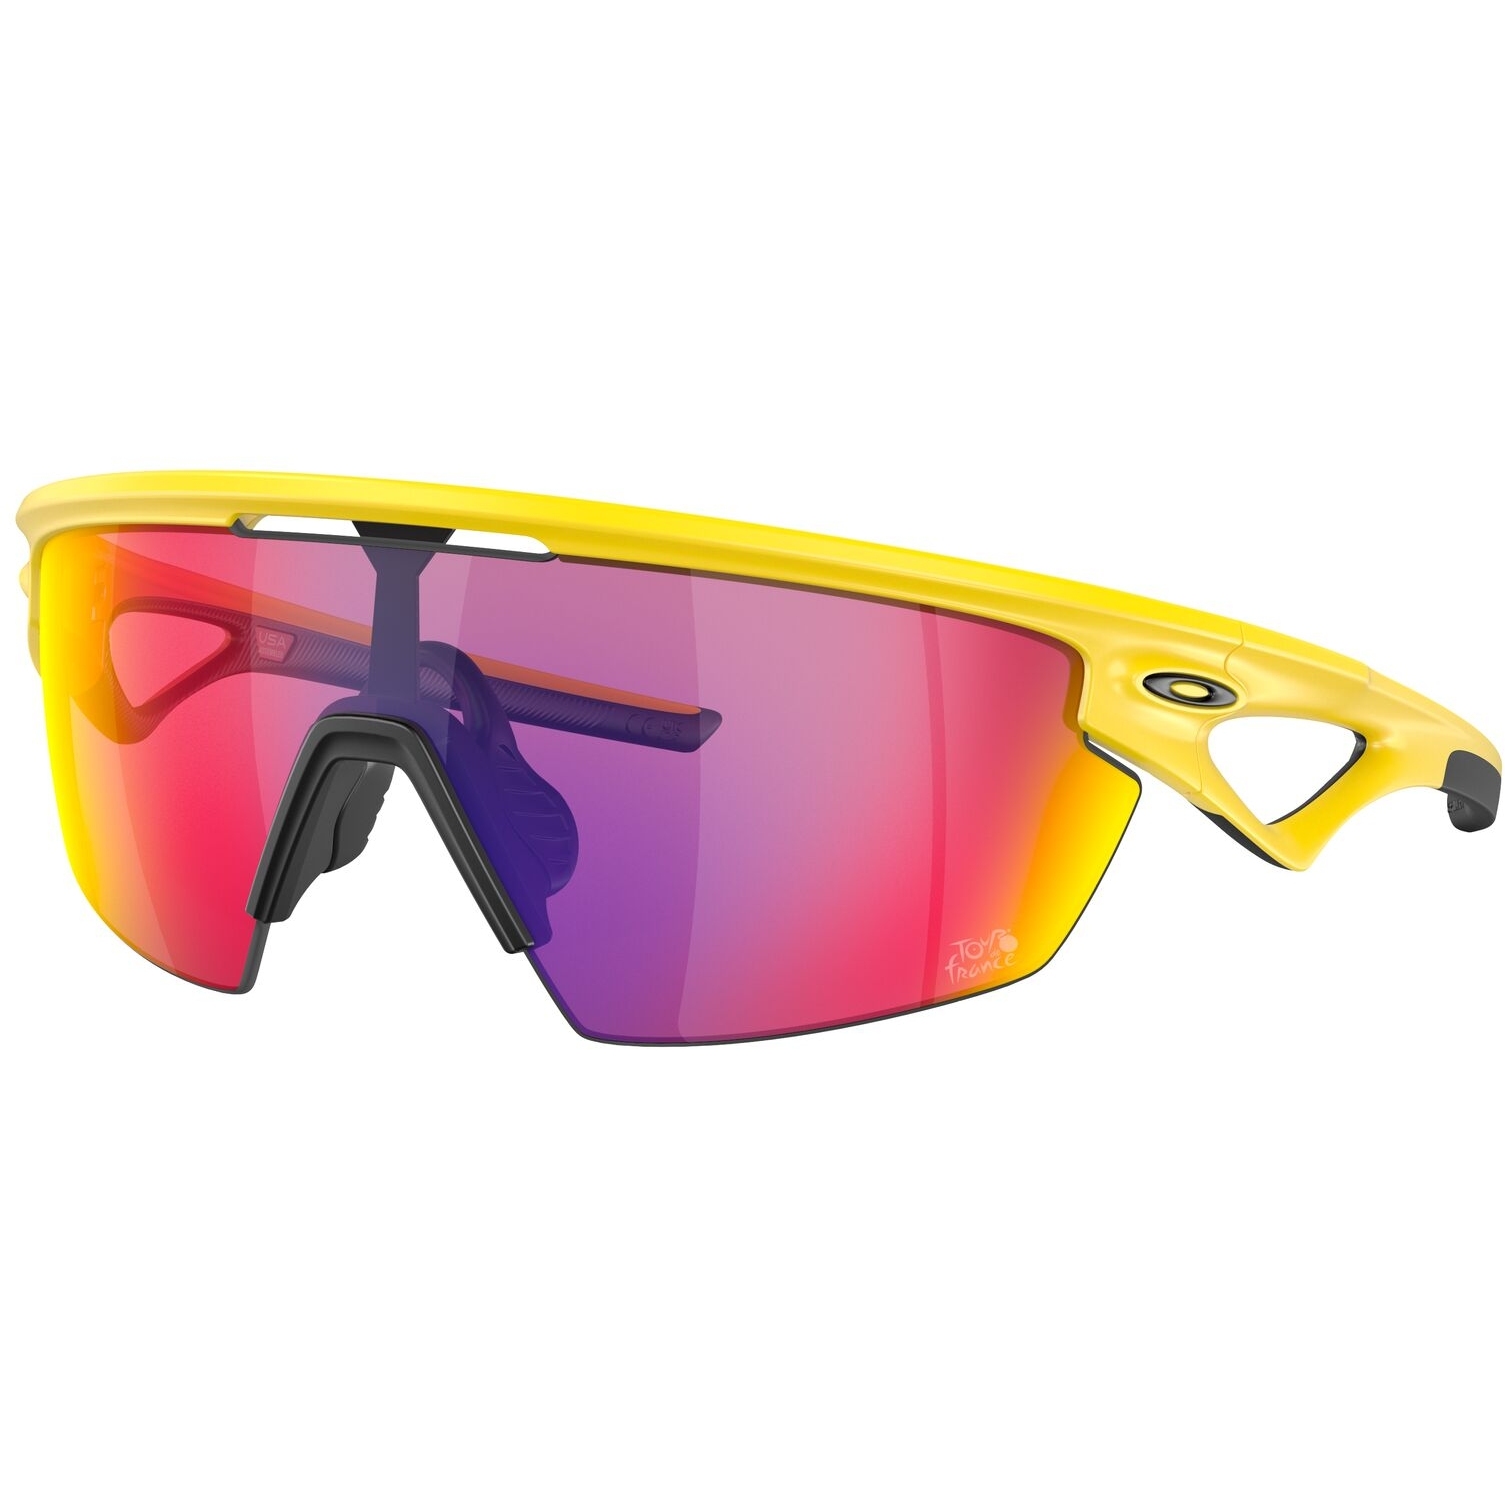 Picture of Oakley Sphaera Glasses - Matte Yellow/Prizm Road - OO9403-1236